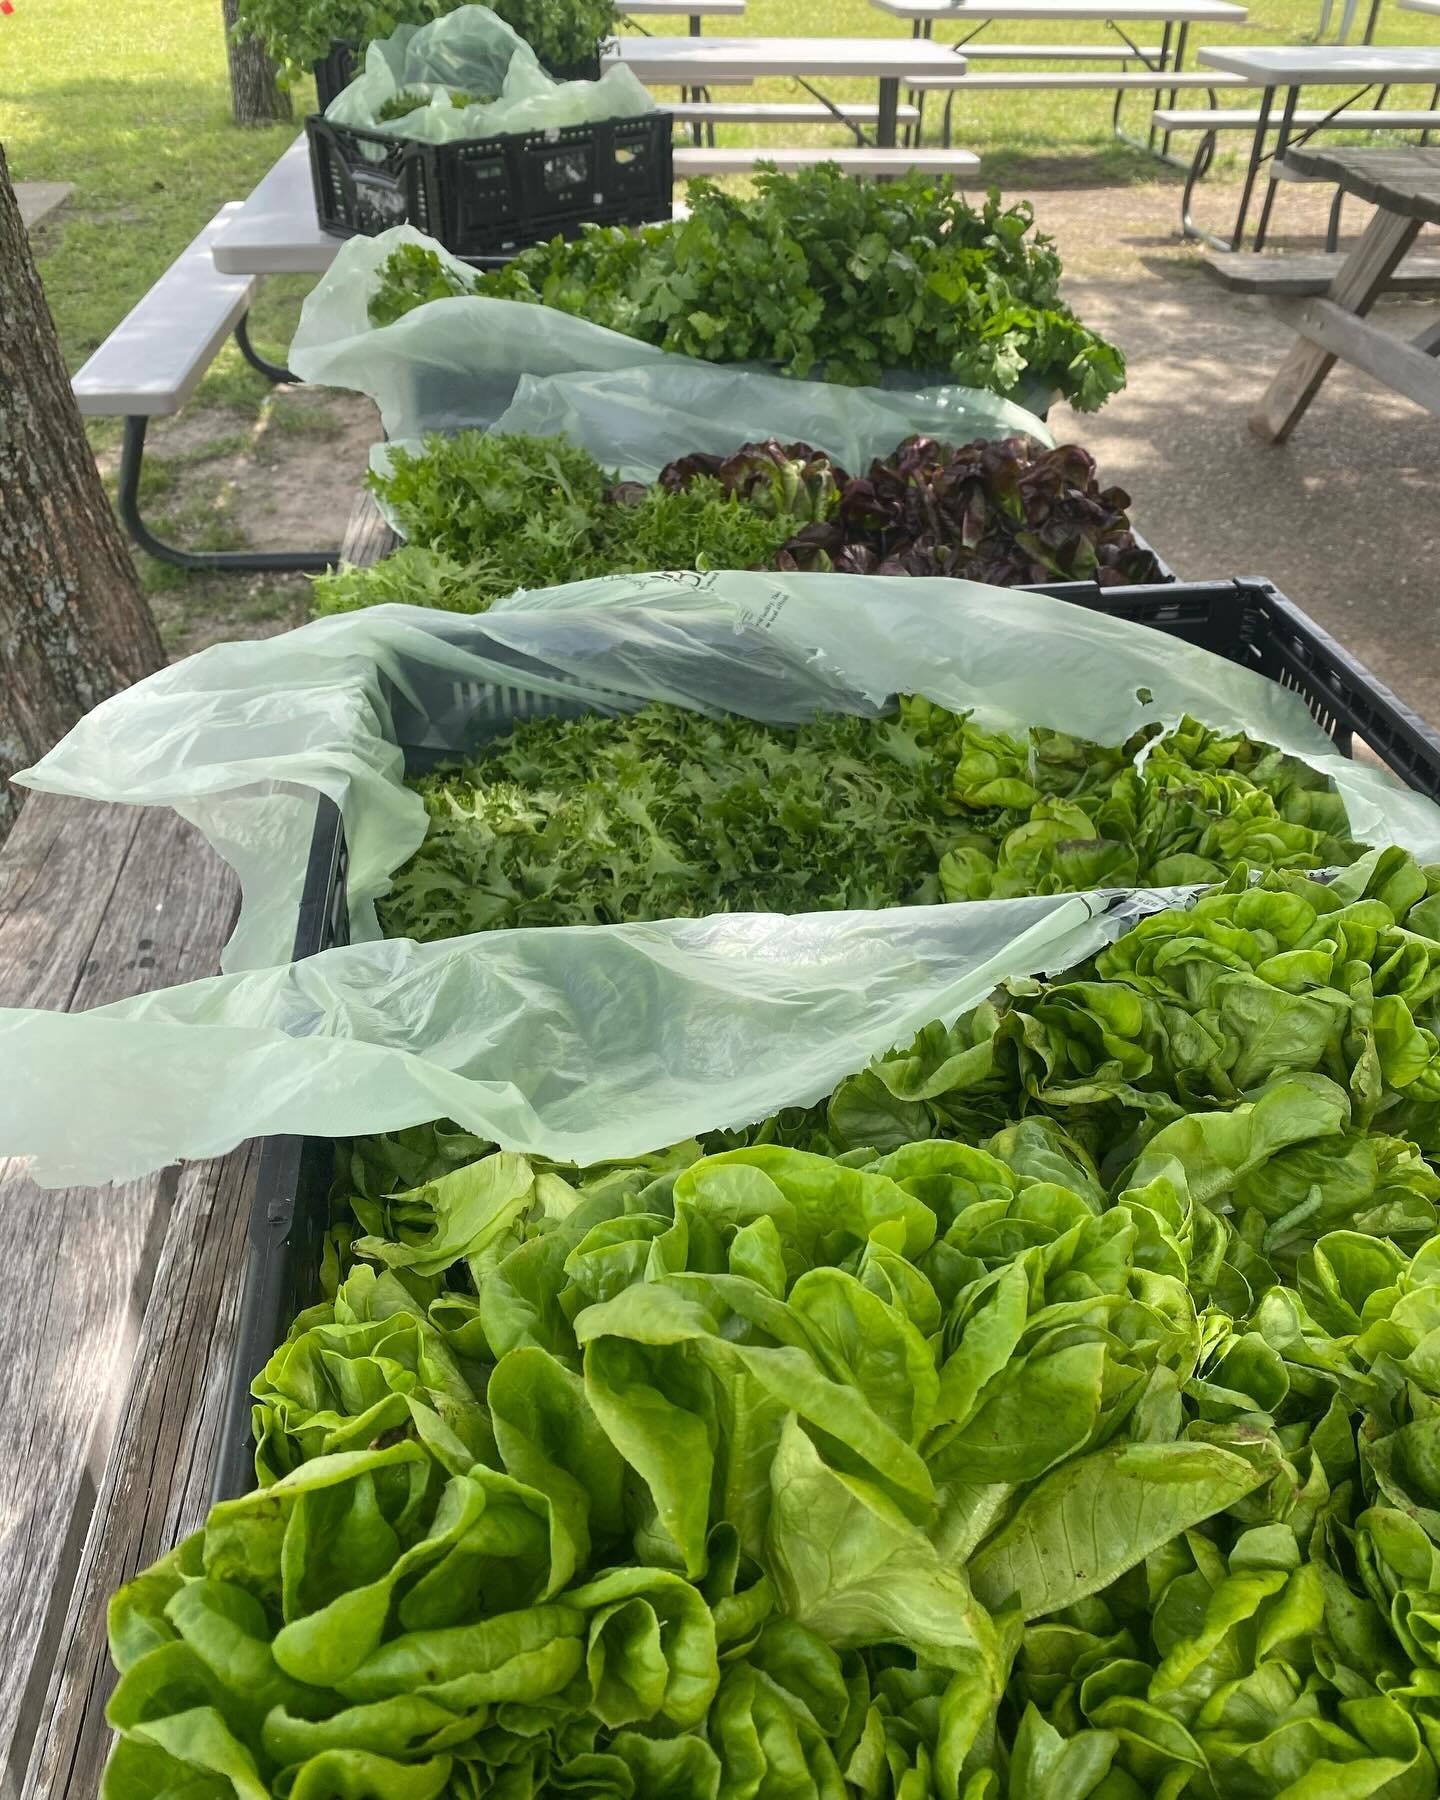 Thank you to all of the MISD students that came to McKinney Roots last week and helped harvest lettuce in our greenhouse! These pretty babies went out to feed our community. 

#growingtogive